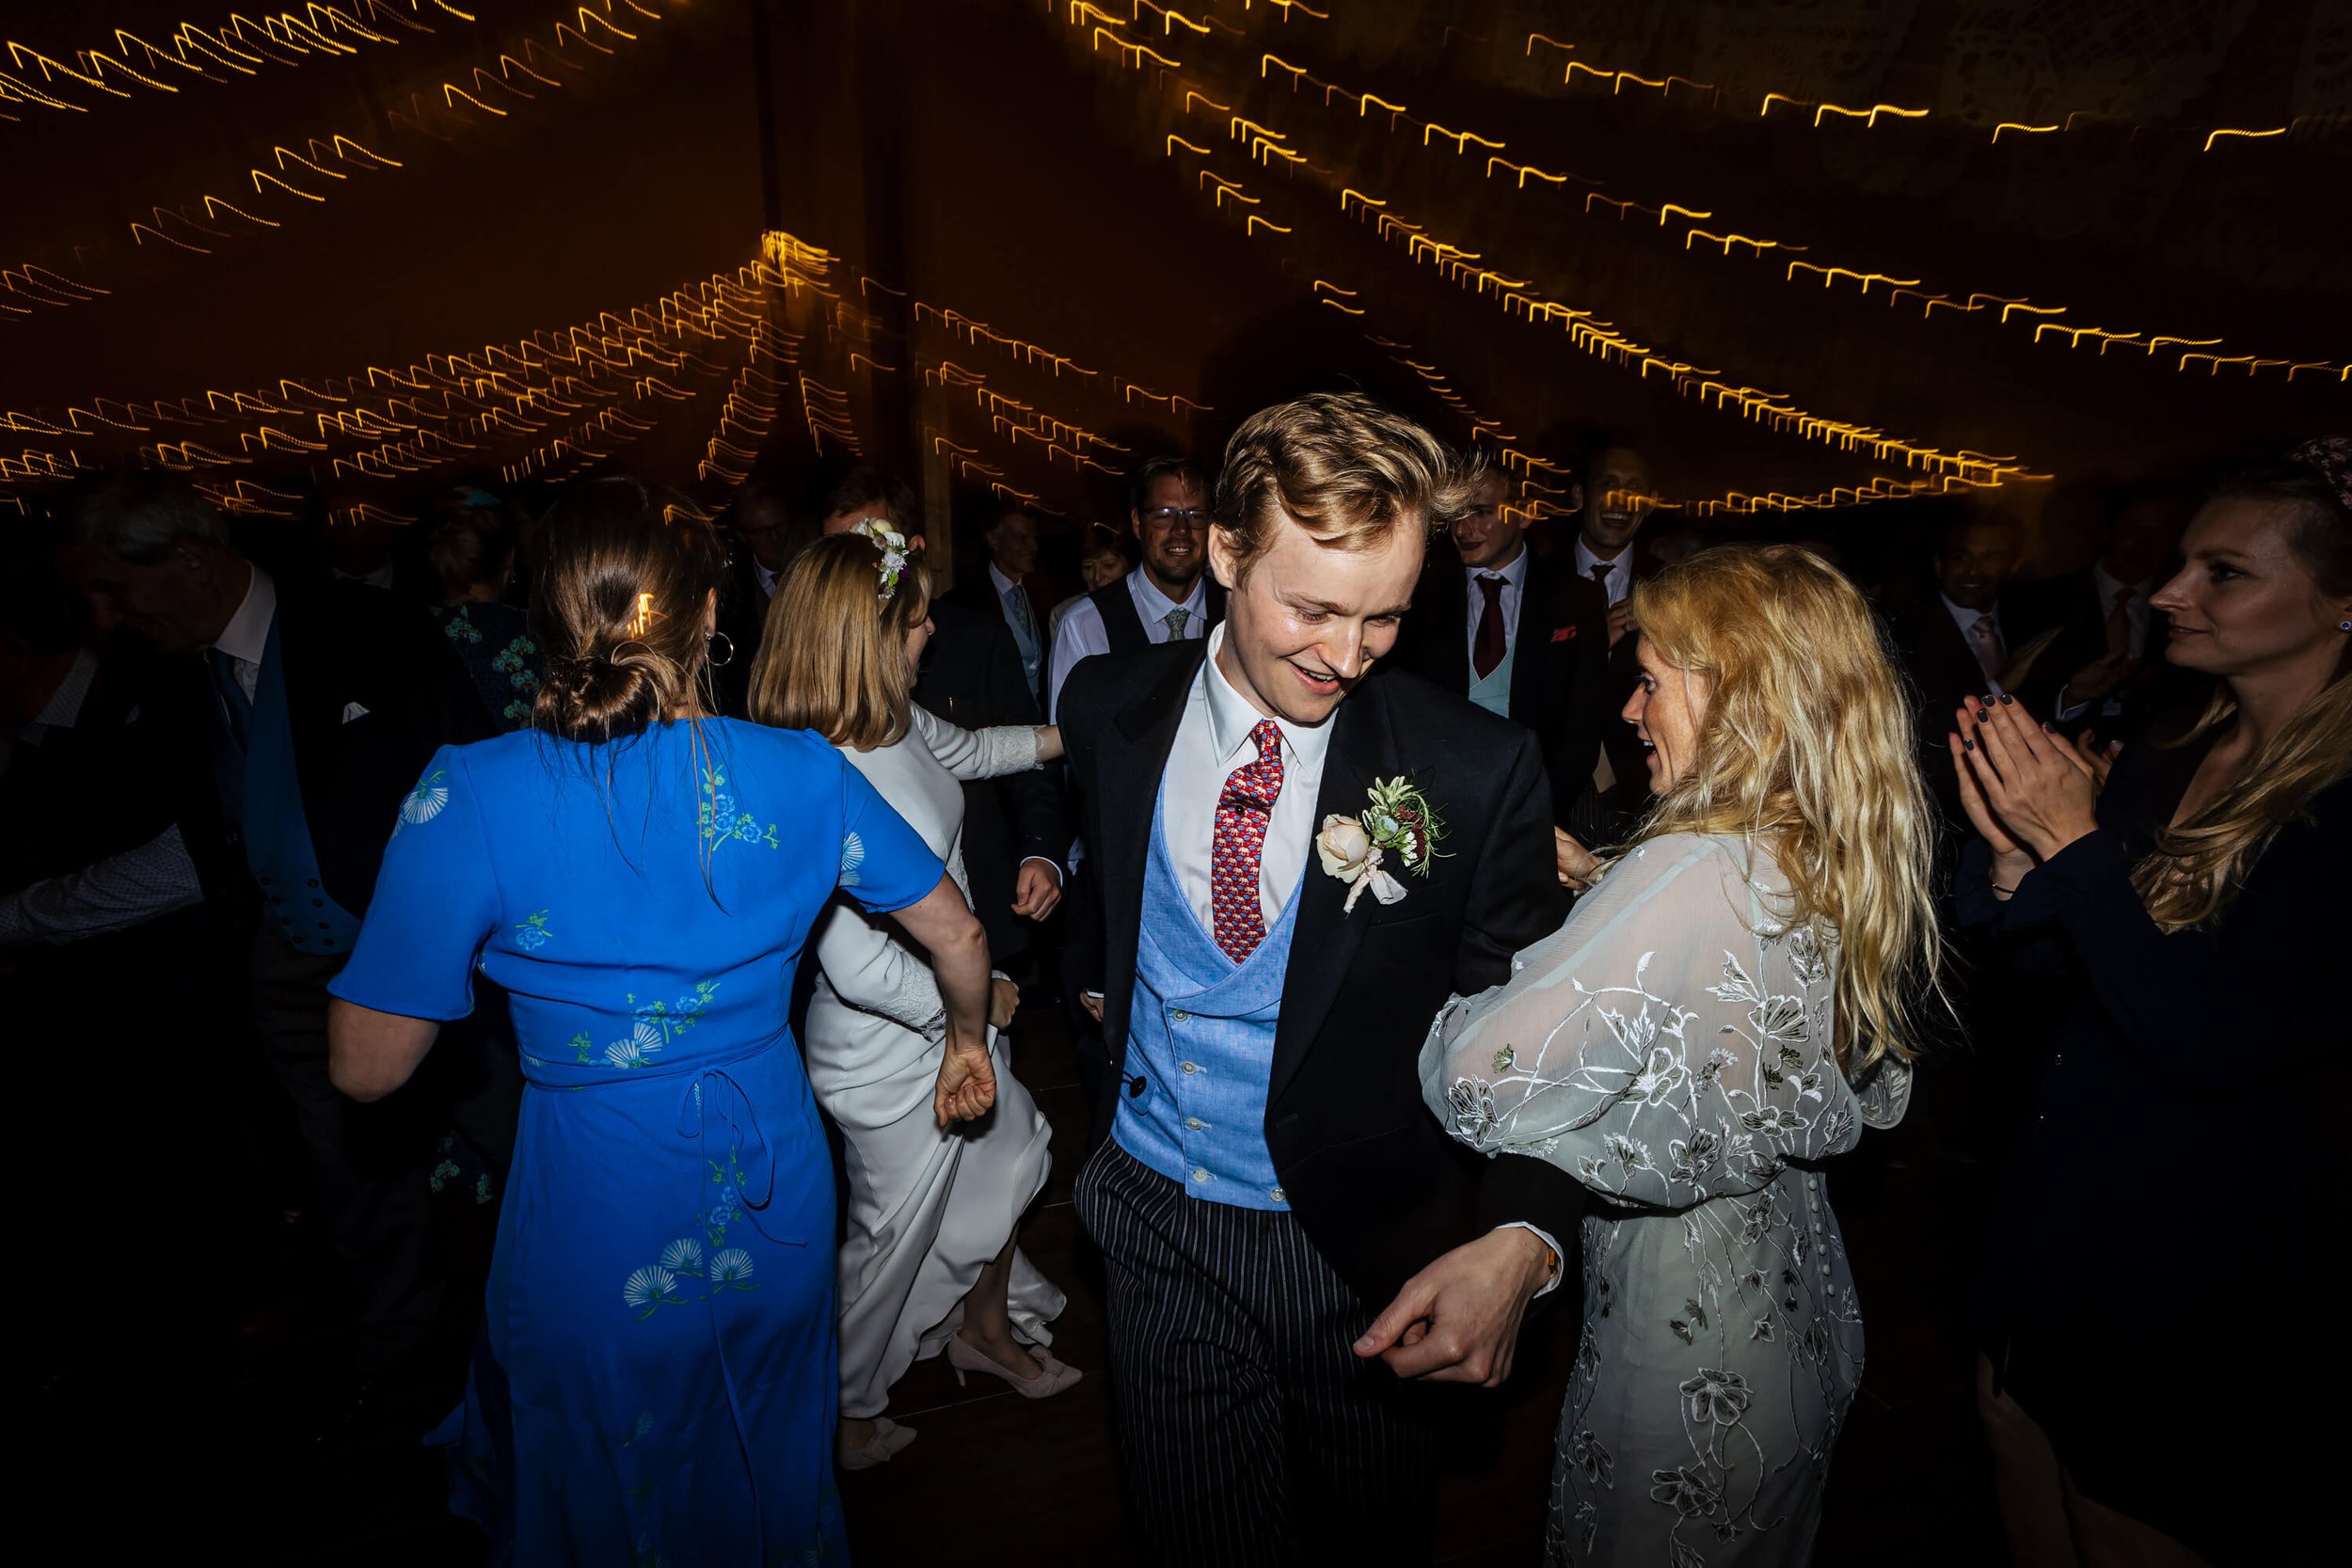 Groom dancing with guests at his wedding reception